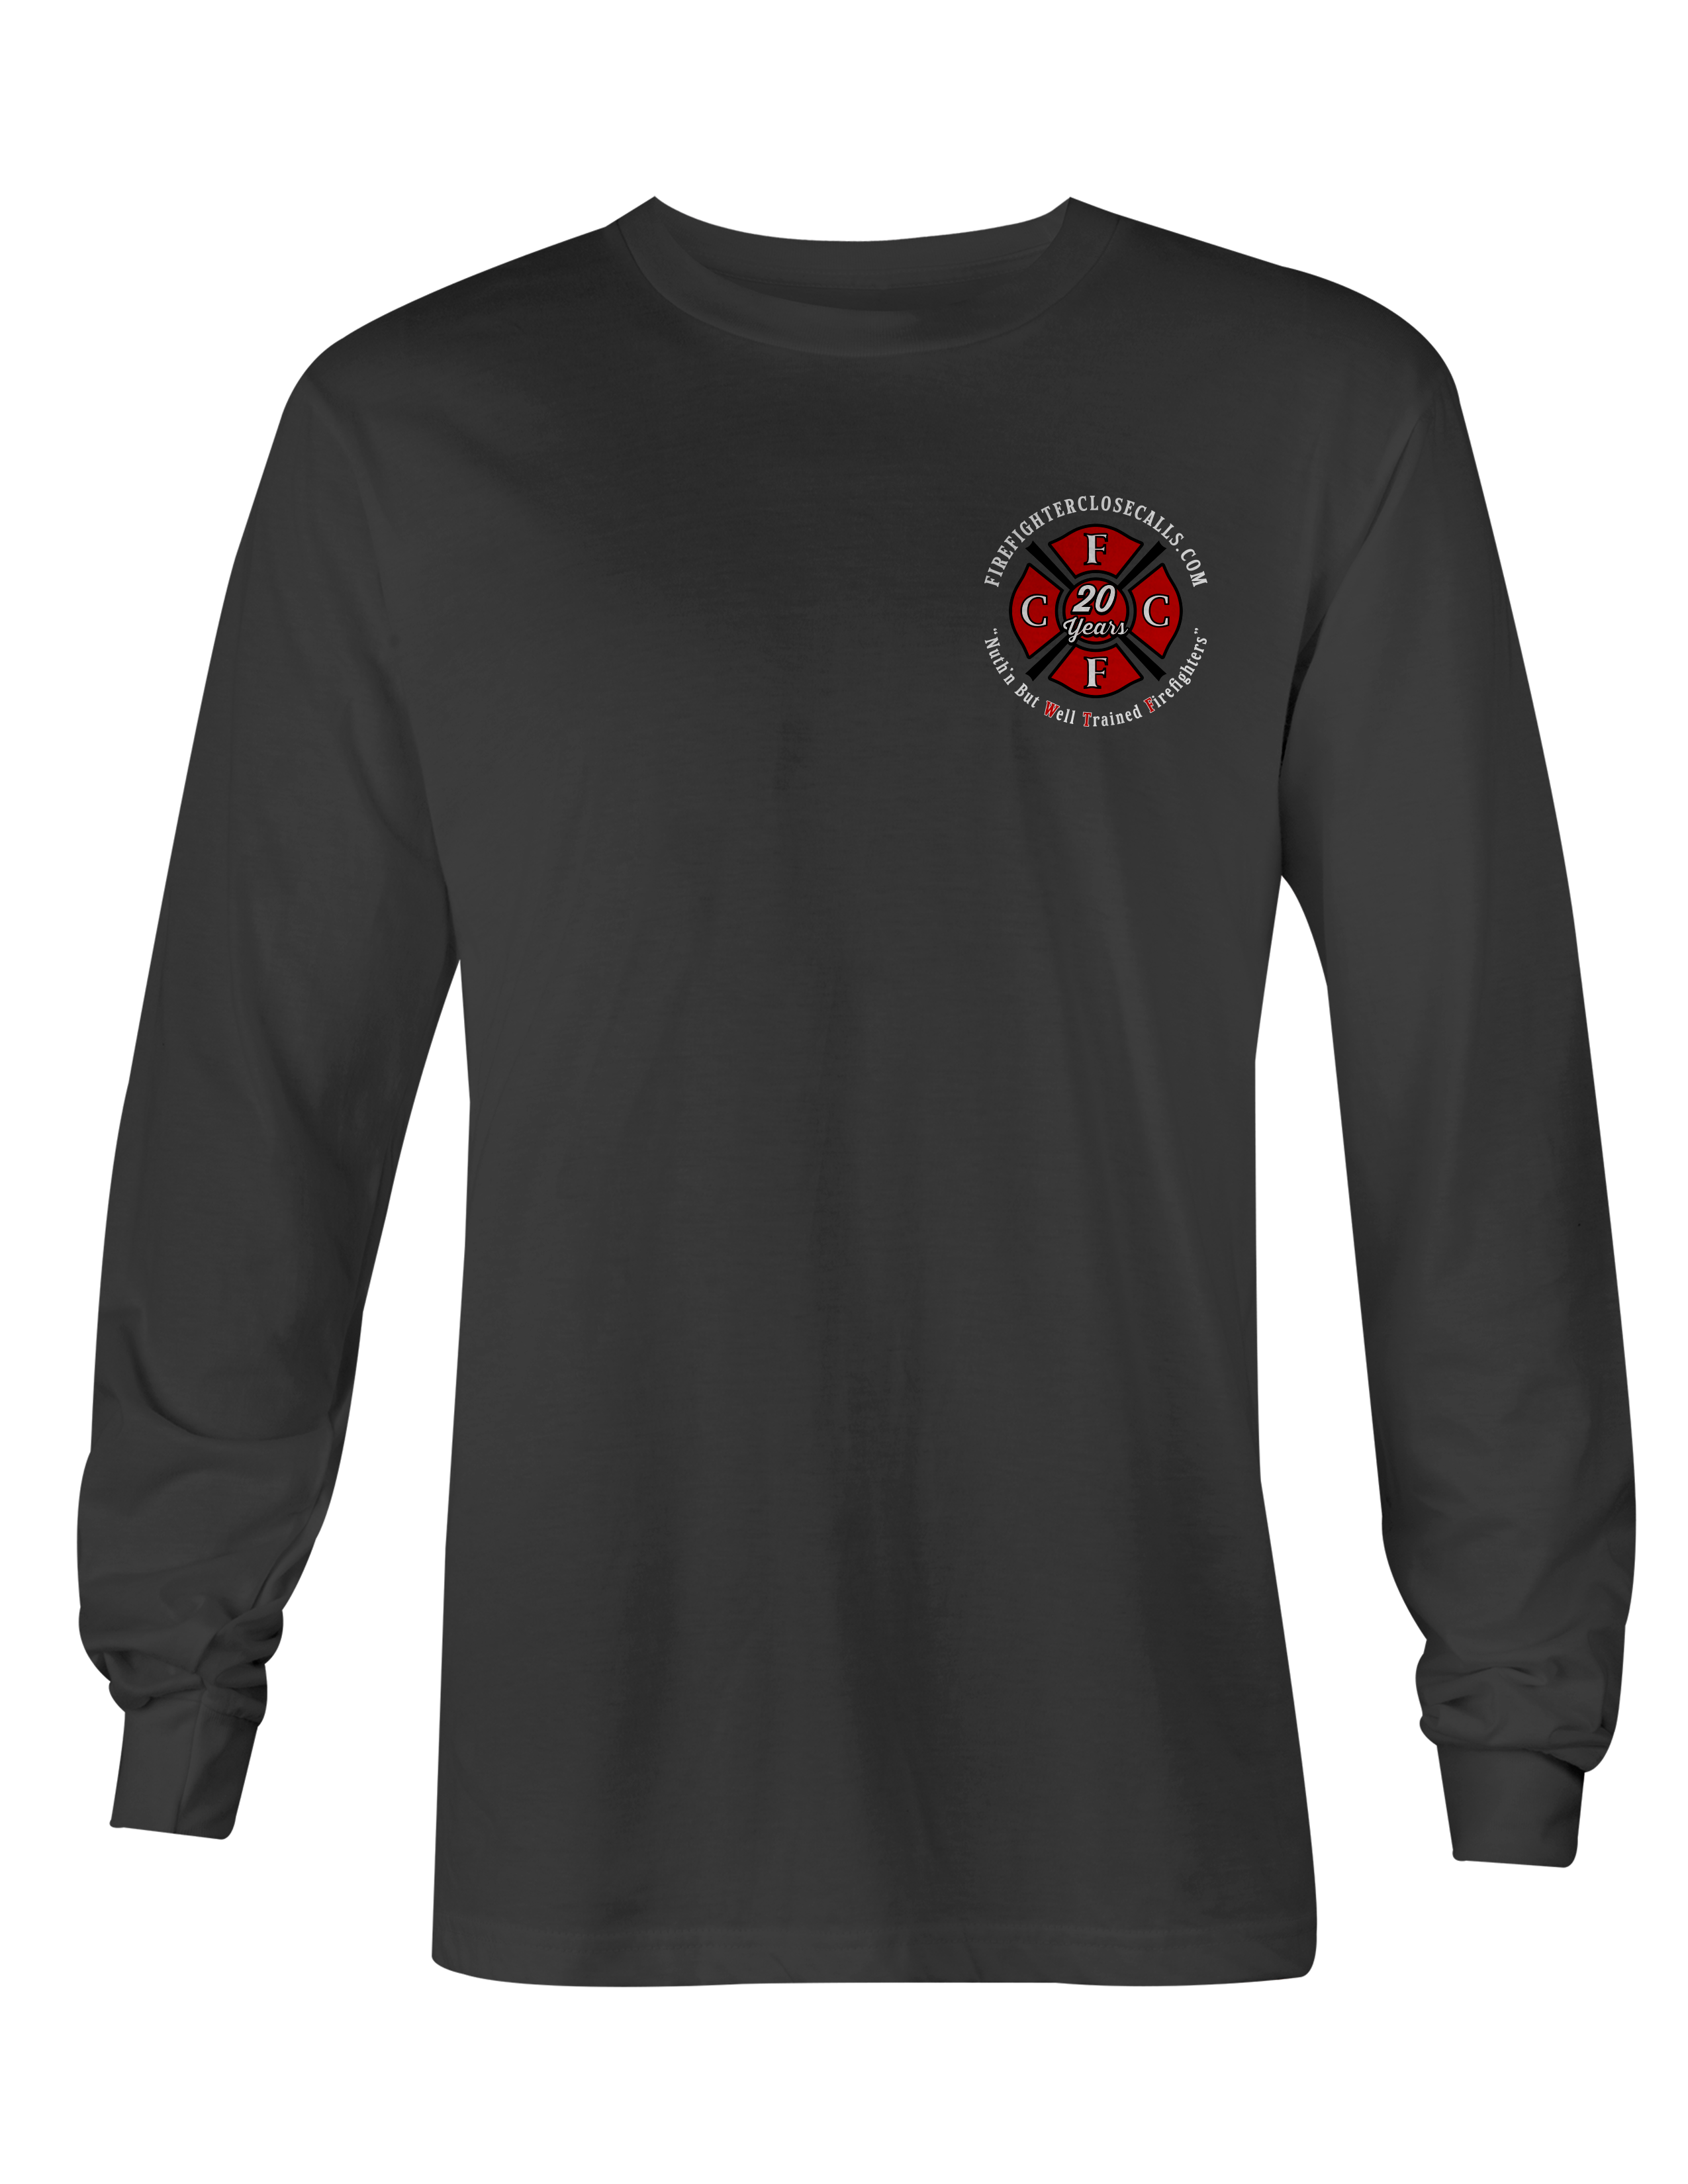 FireFightersclosecalls.com 20th Anniversary Charity Tee Long Sleeve